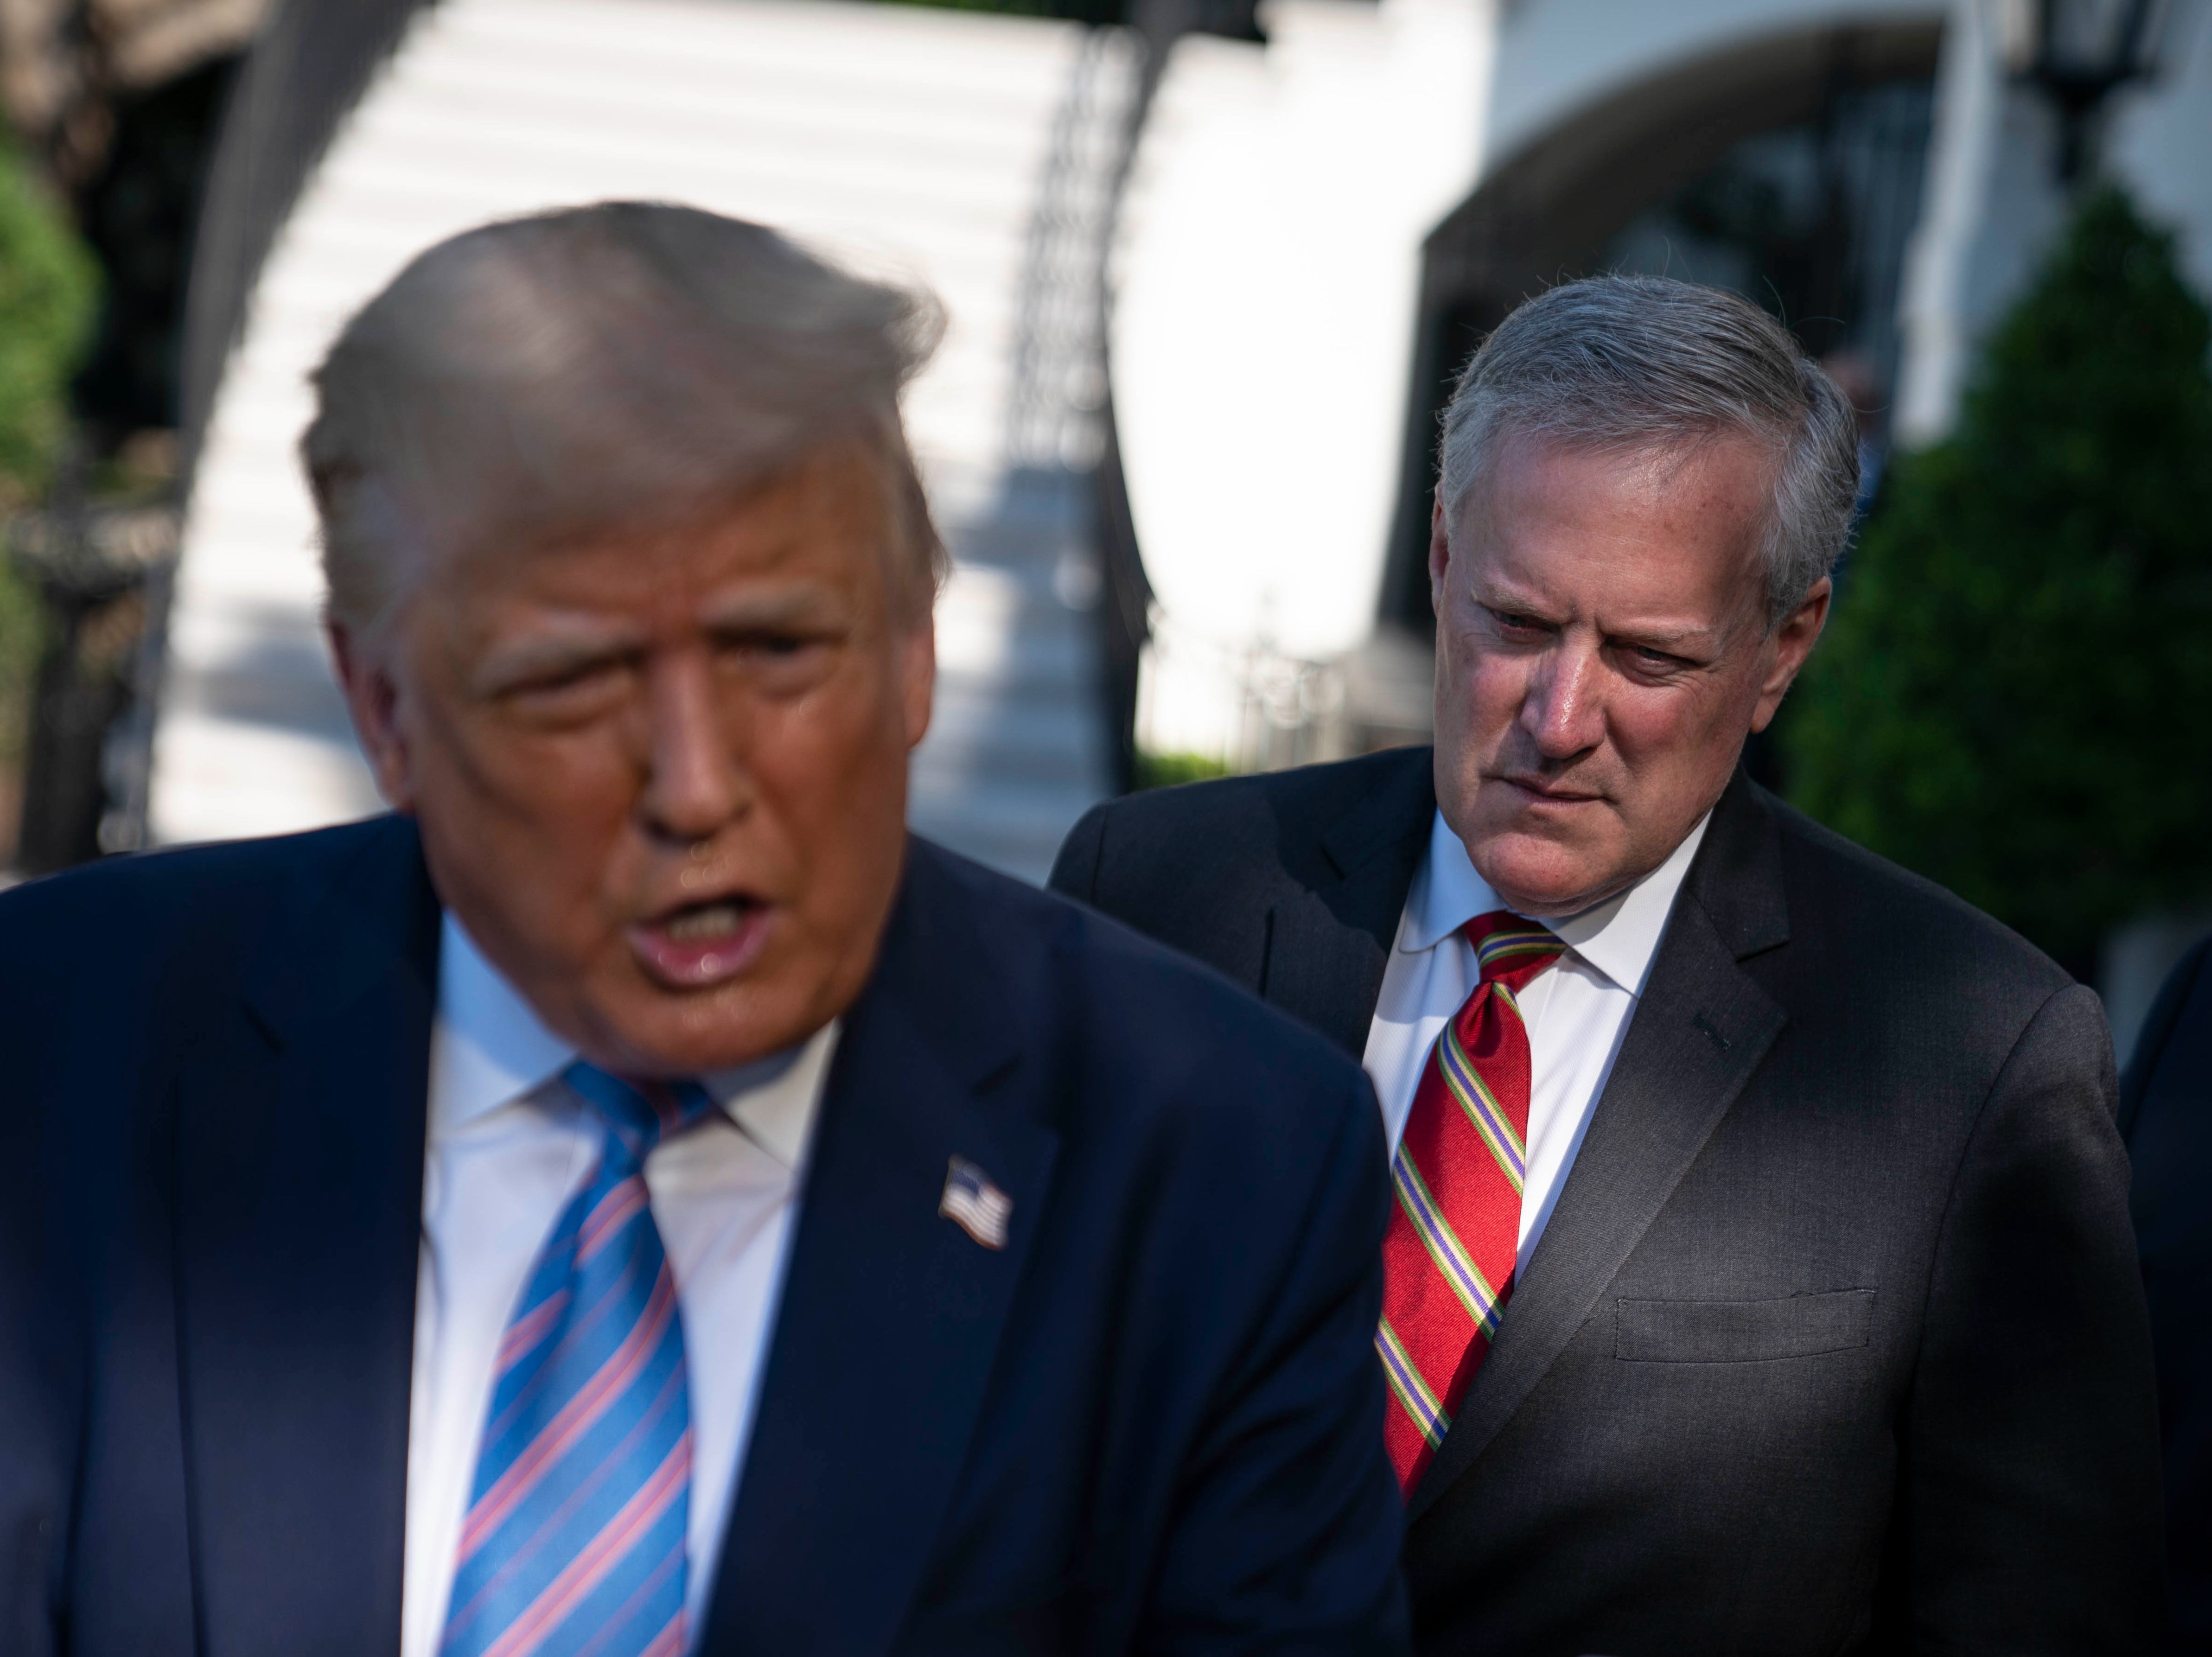 Mark Meadows is said to be cooperating with the investigations into his former boss